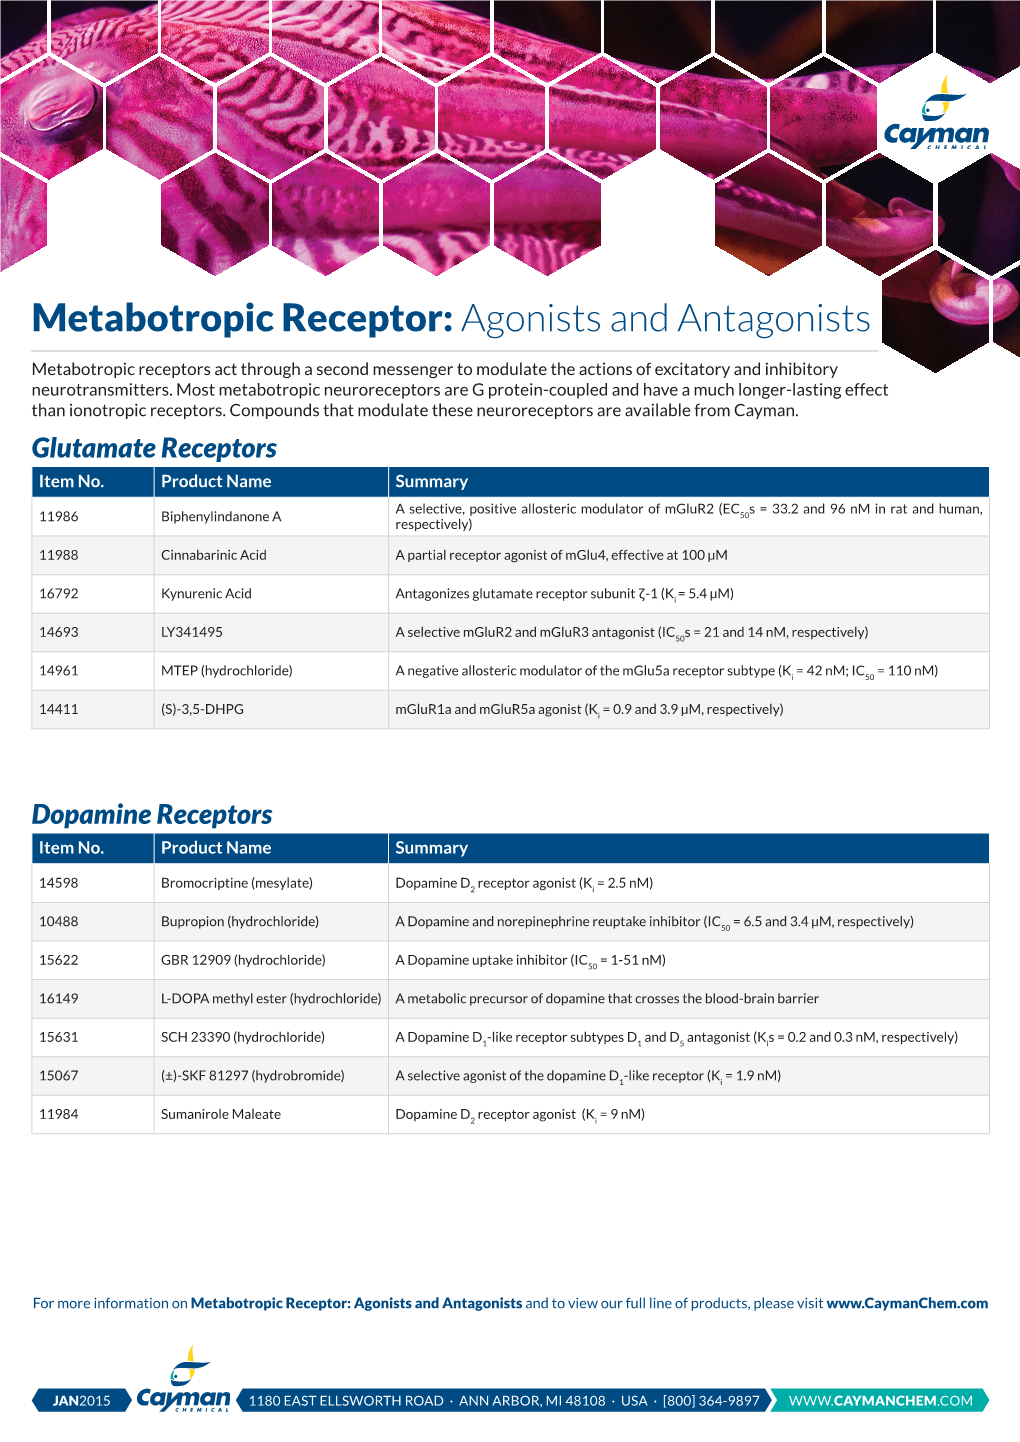 Metabotropic Receptor: Agonists and Antagonists